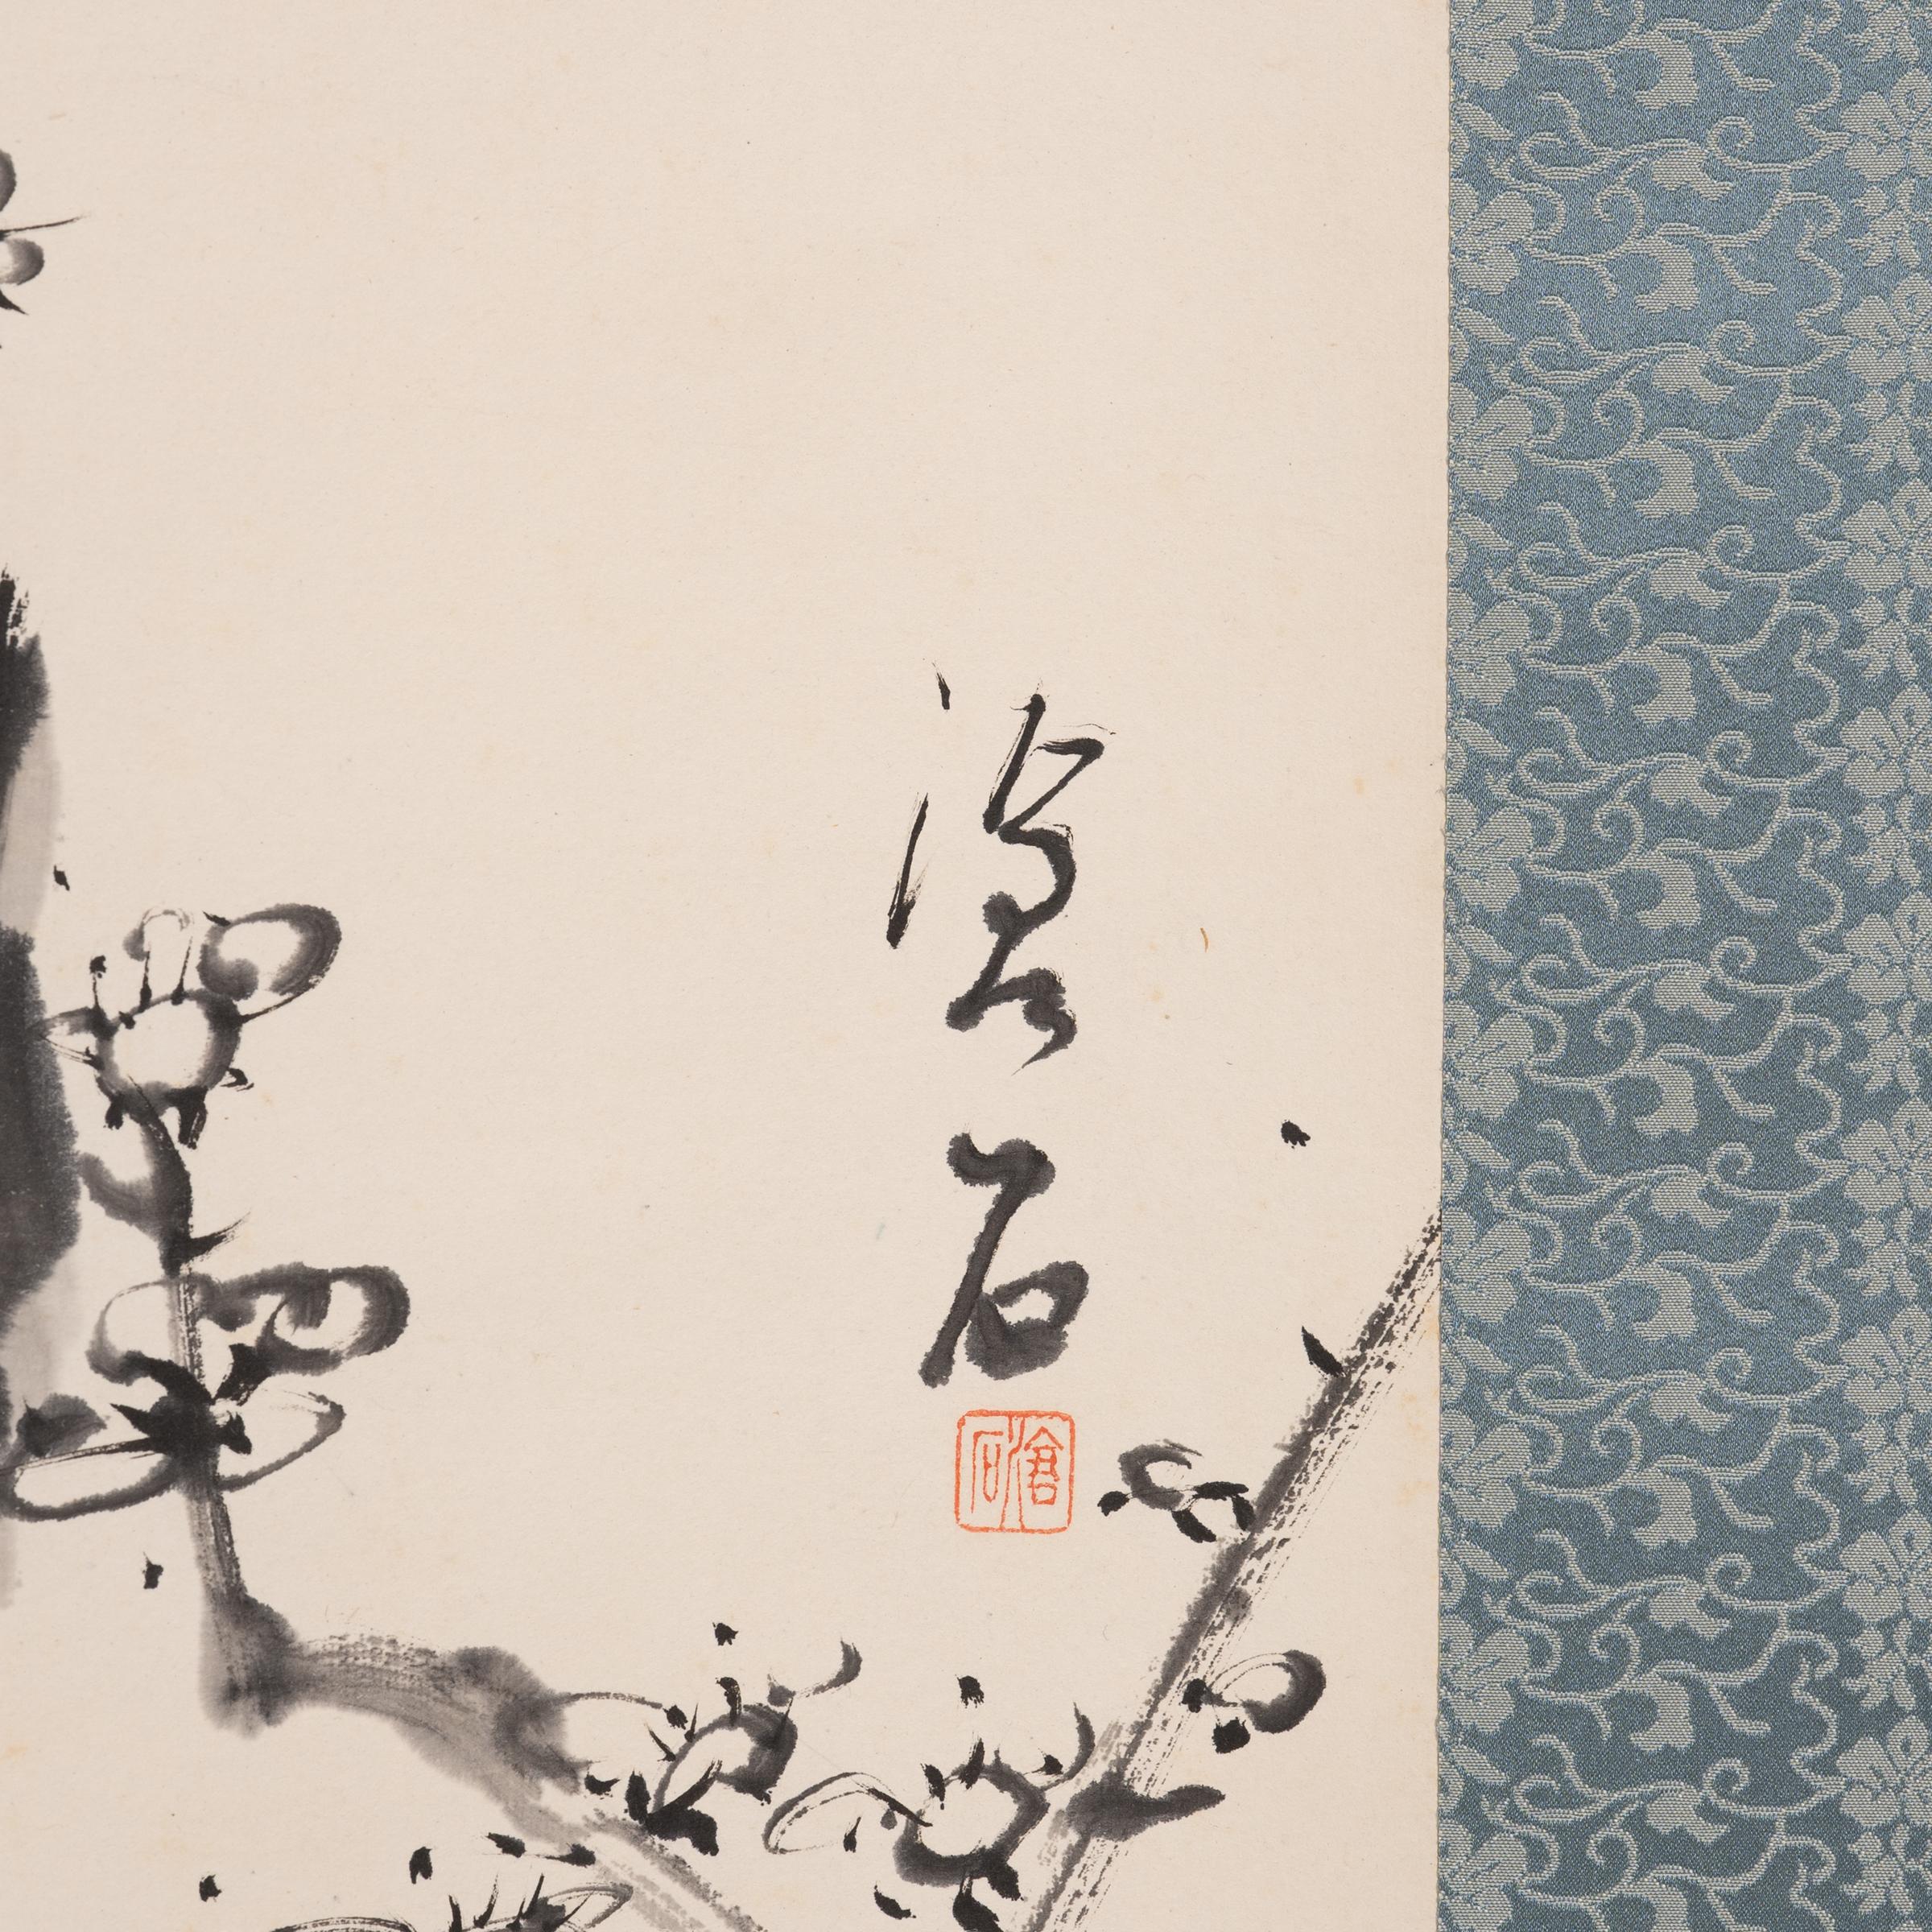 This Korean hanging scroll from the mid-20th century honors traditional calligraphy painting with delicate detail and a refined composition, thought to inspire clear and concise thinking. Expressing the beauty and resilience of nature’s flora, ink